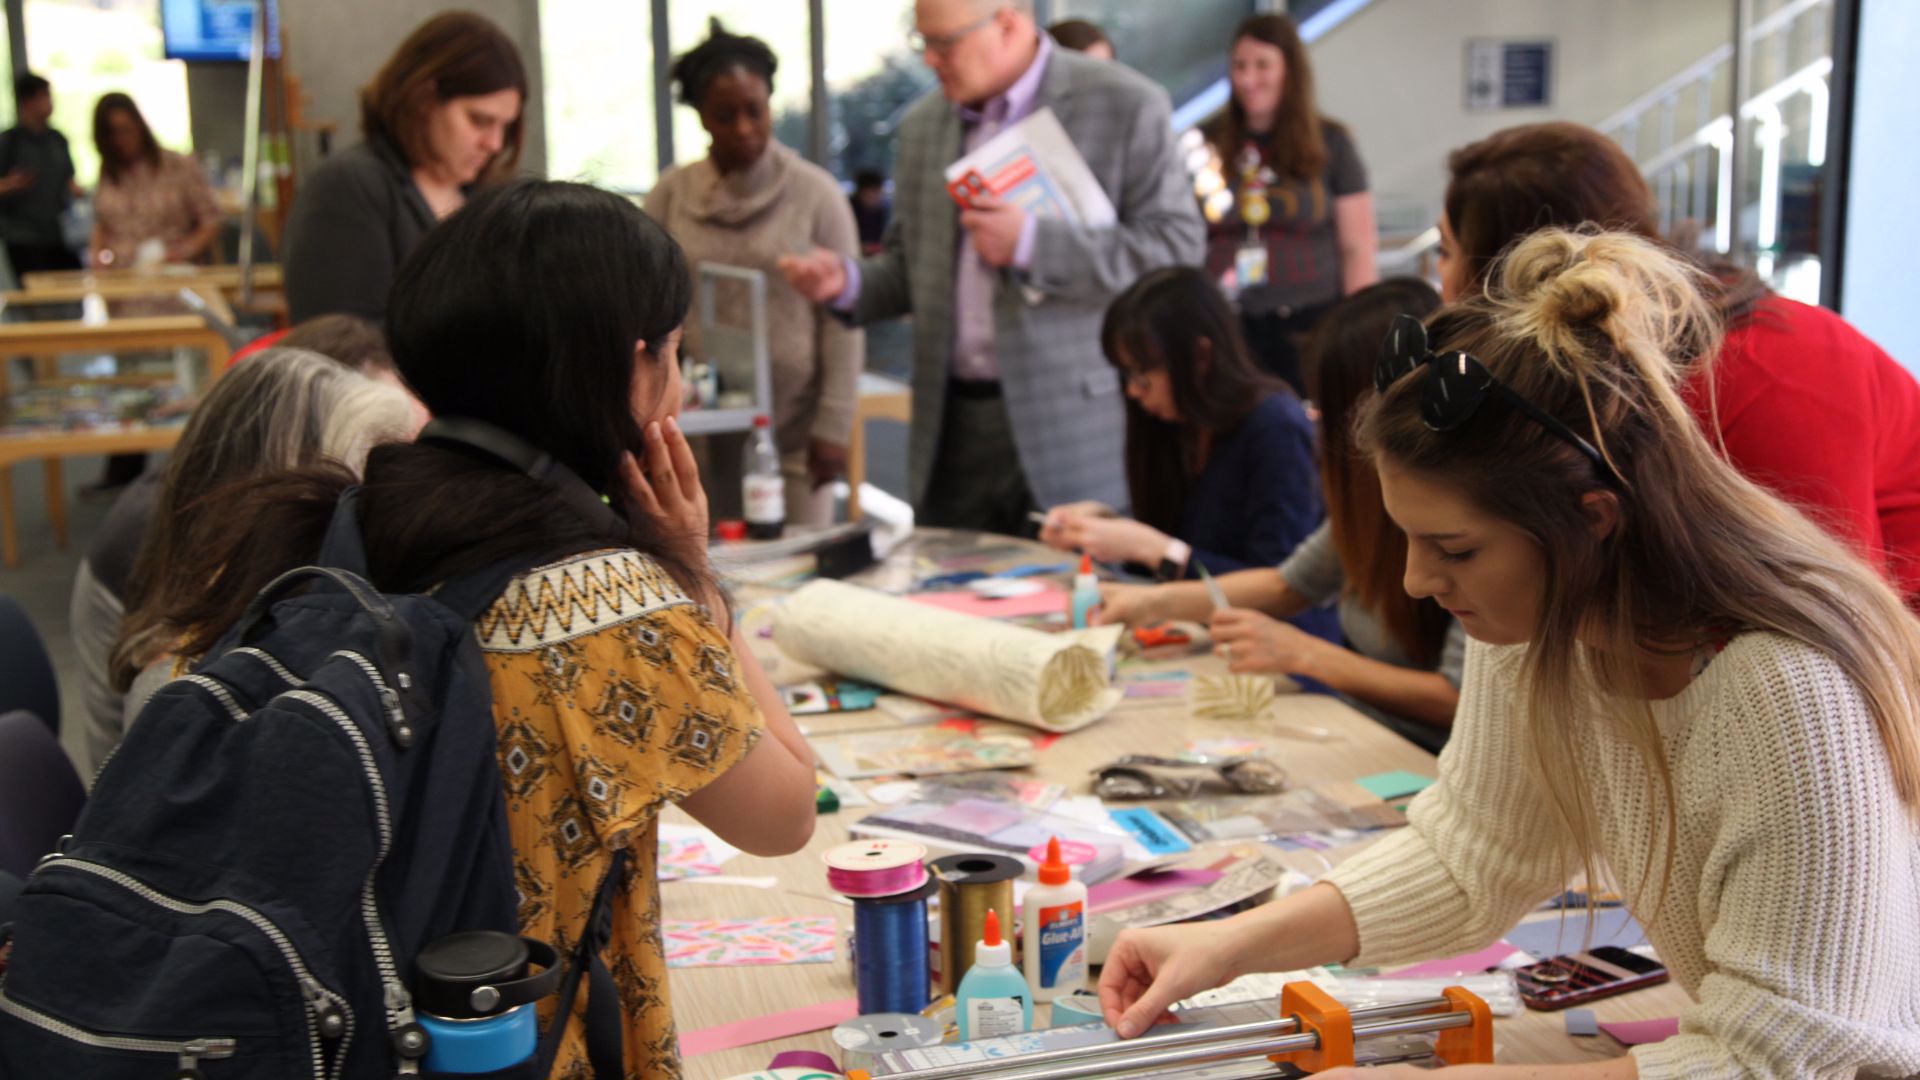 A picture of people decorating bookmarks.